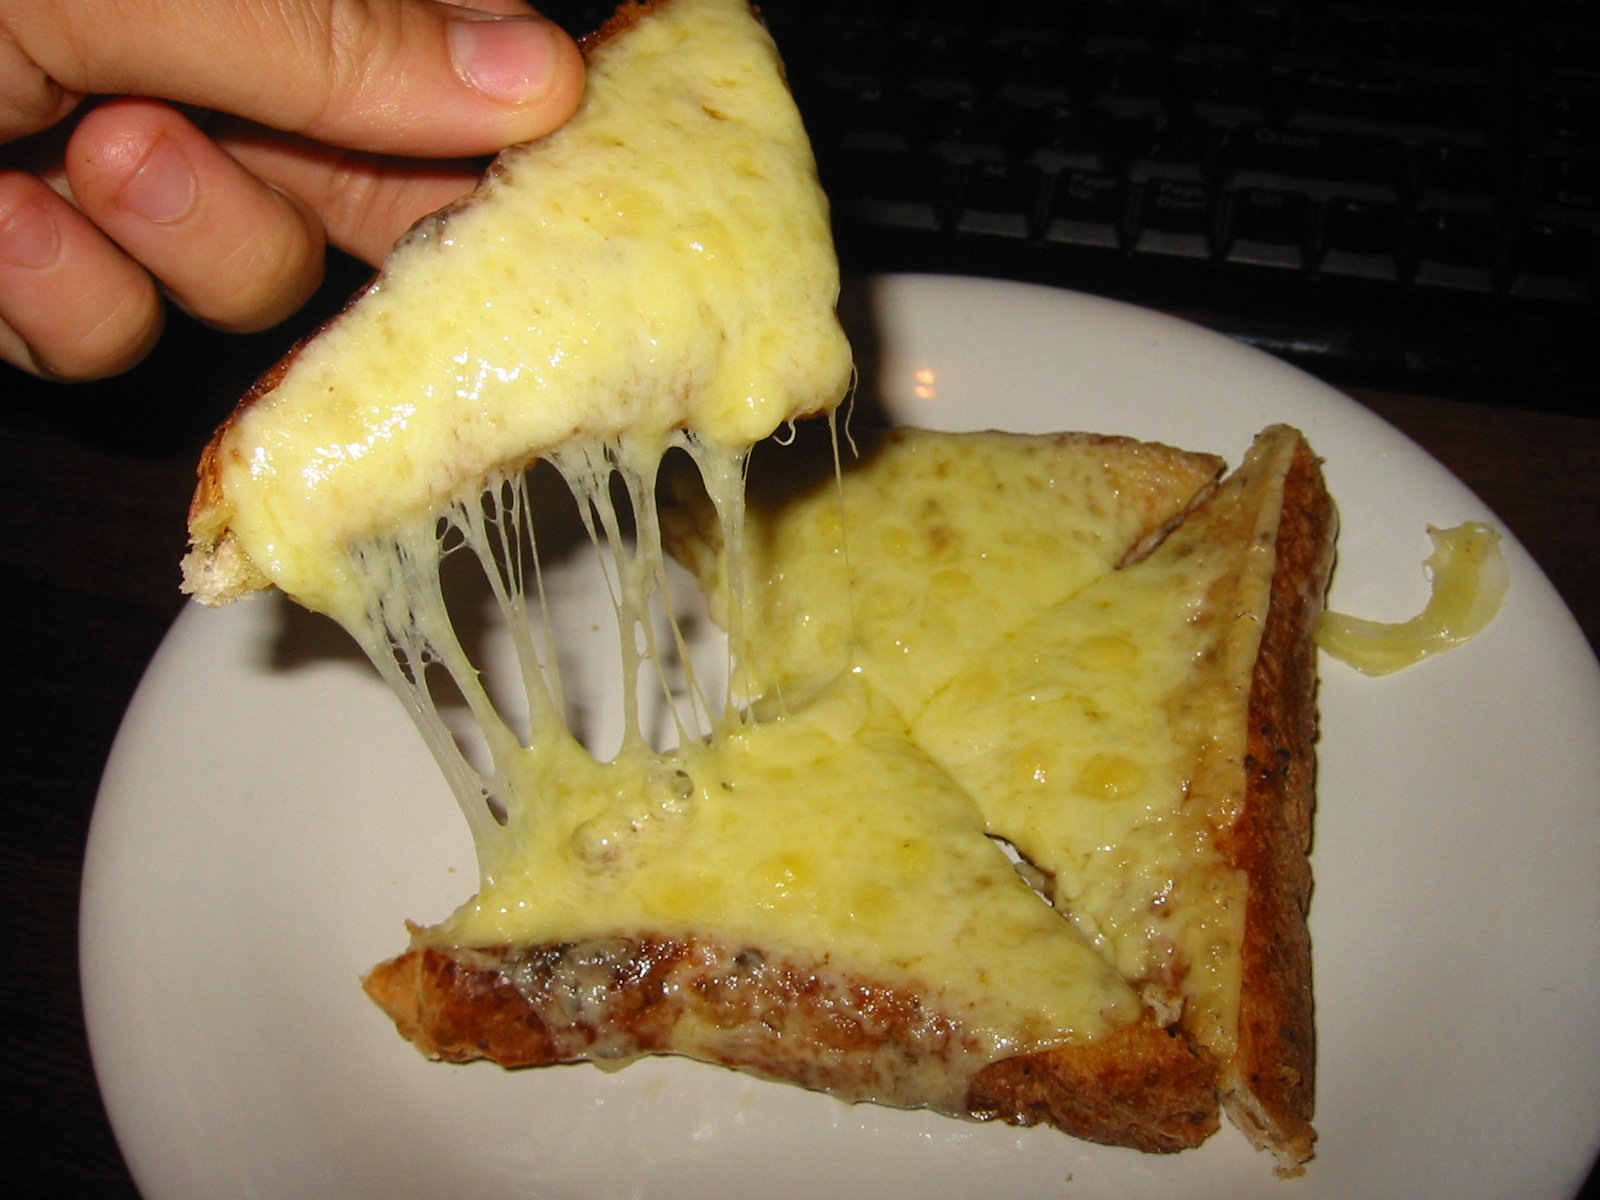 Grilled colby cheese on toast - stringy cheese